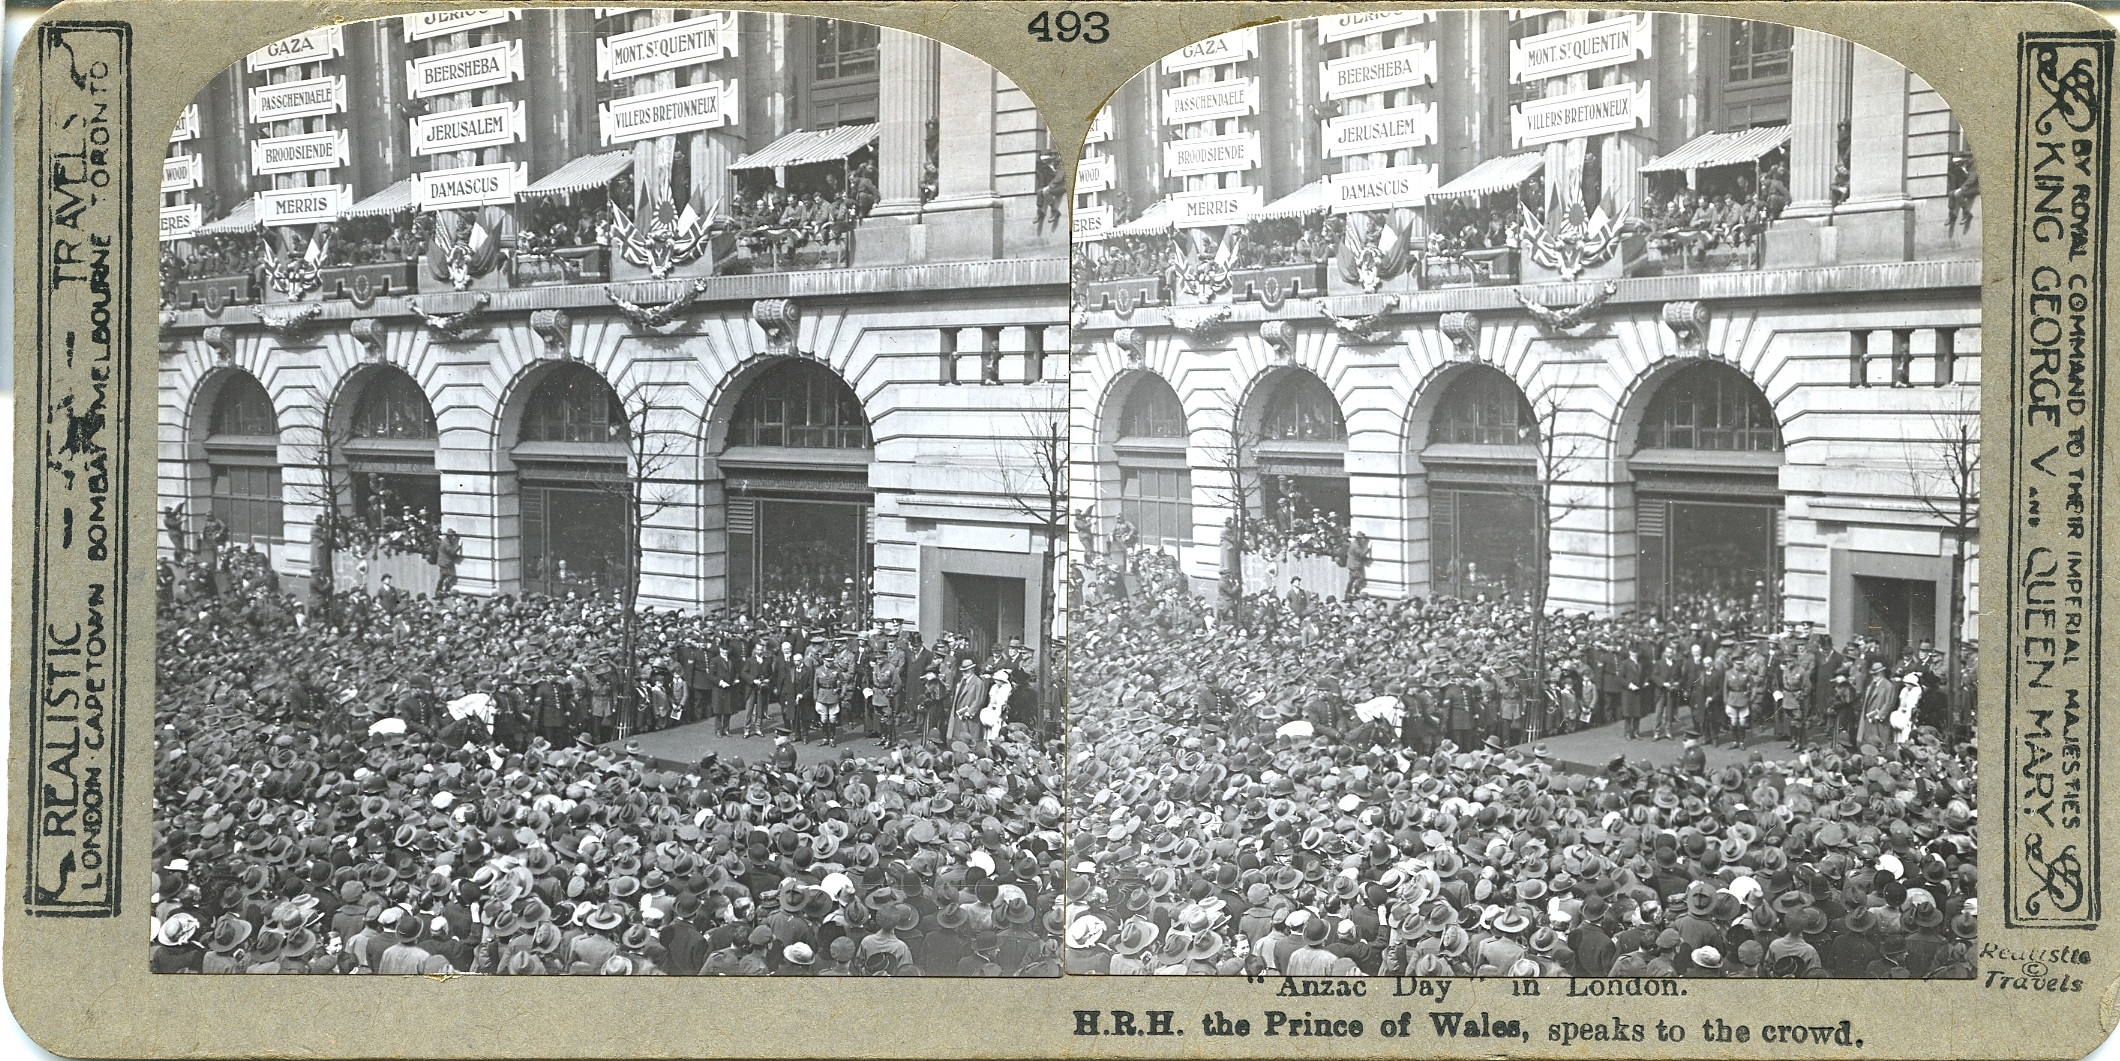 H.R.H. The Prince of Wales addressing a huge crowd on Anzac day outside Australia House